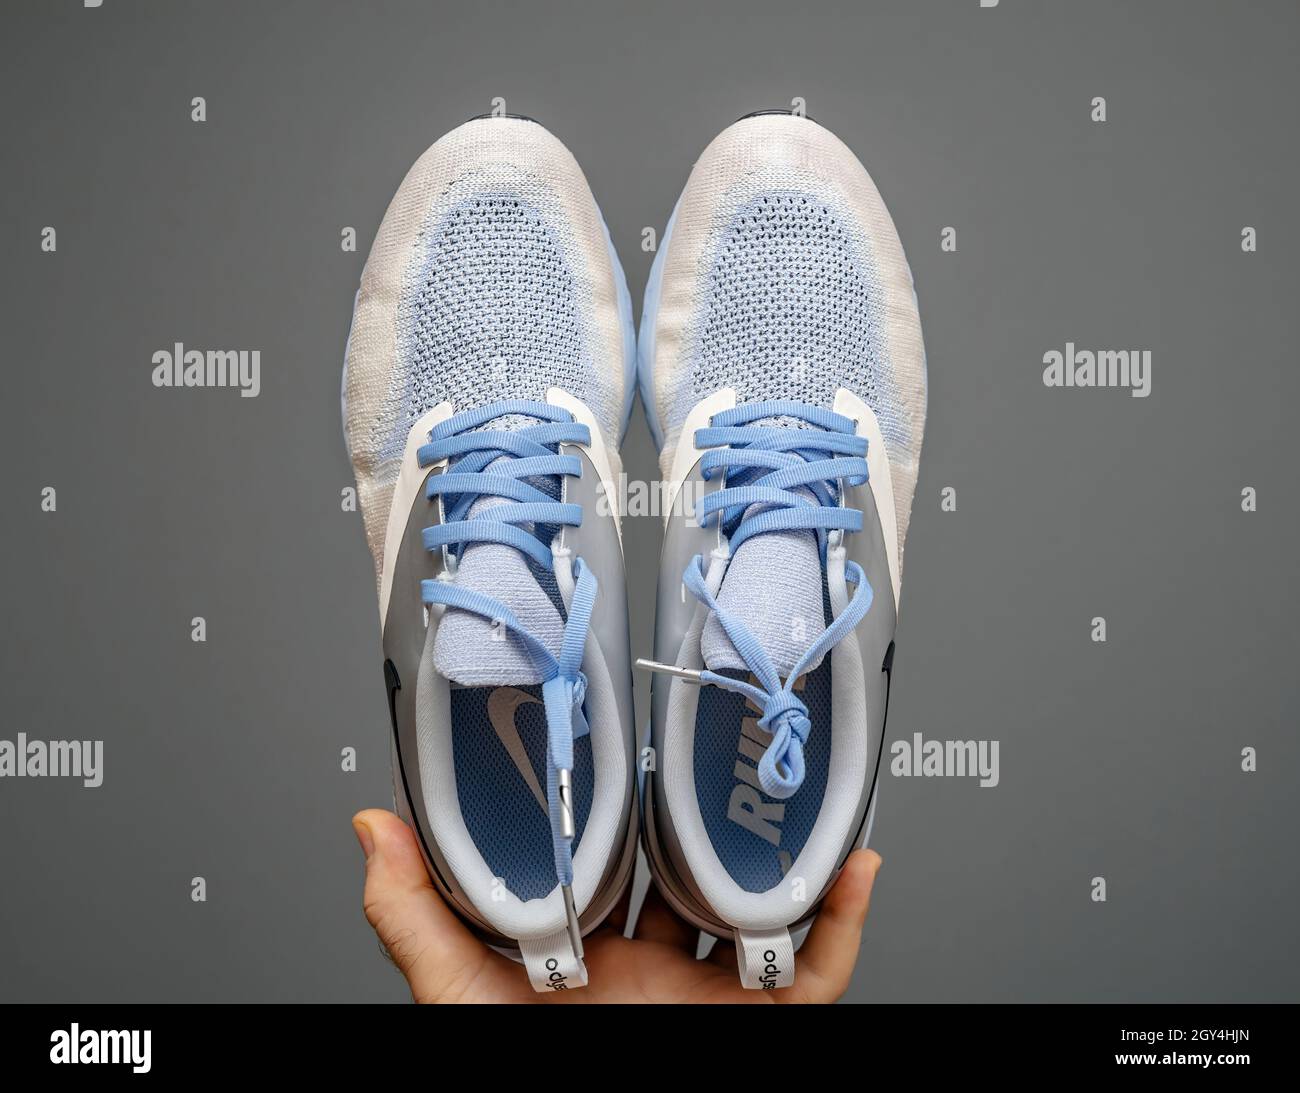 Pov male hand holding showing new luxury running shoes Nike Zoom react  Stock Photo - Alamy